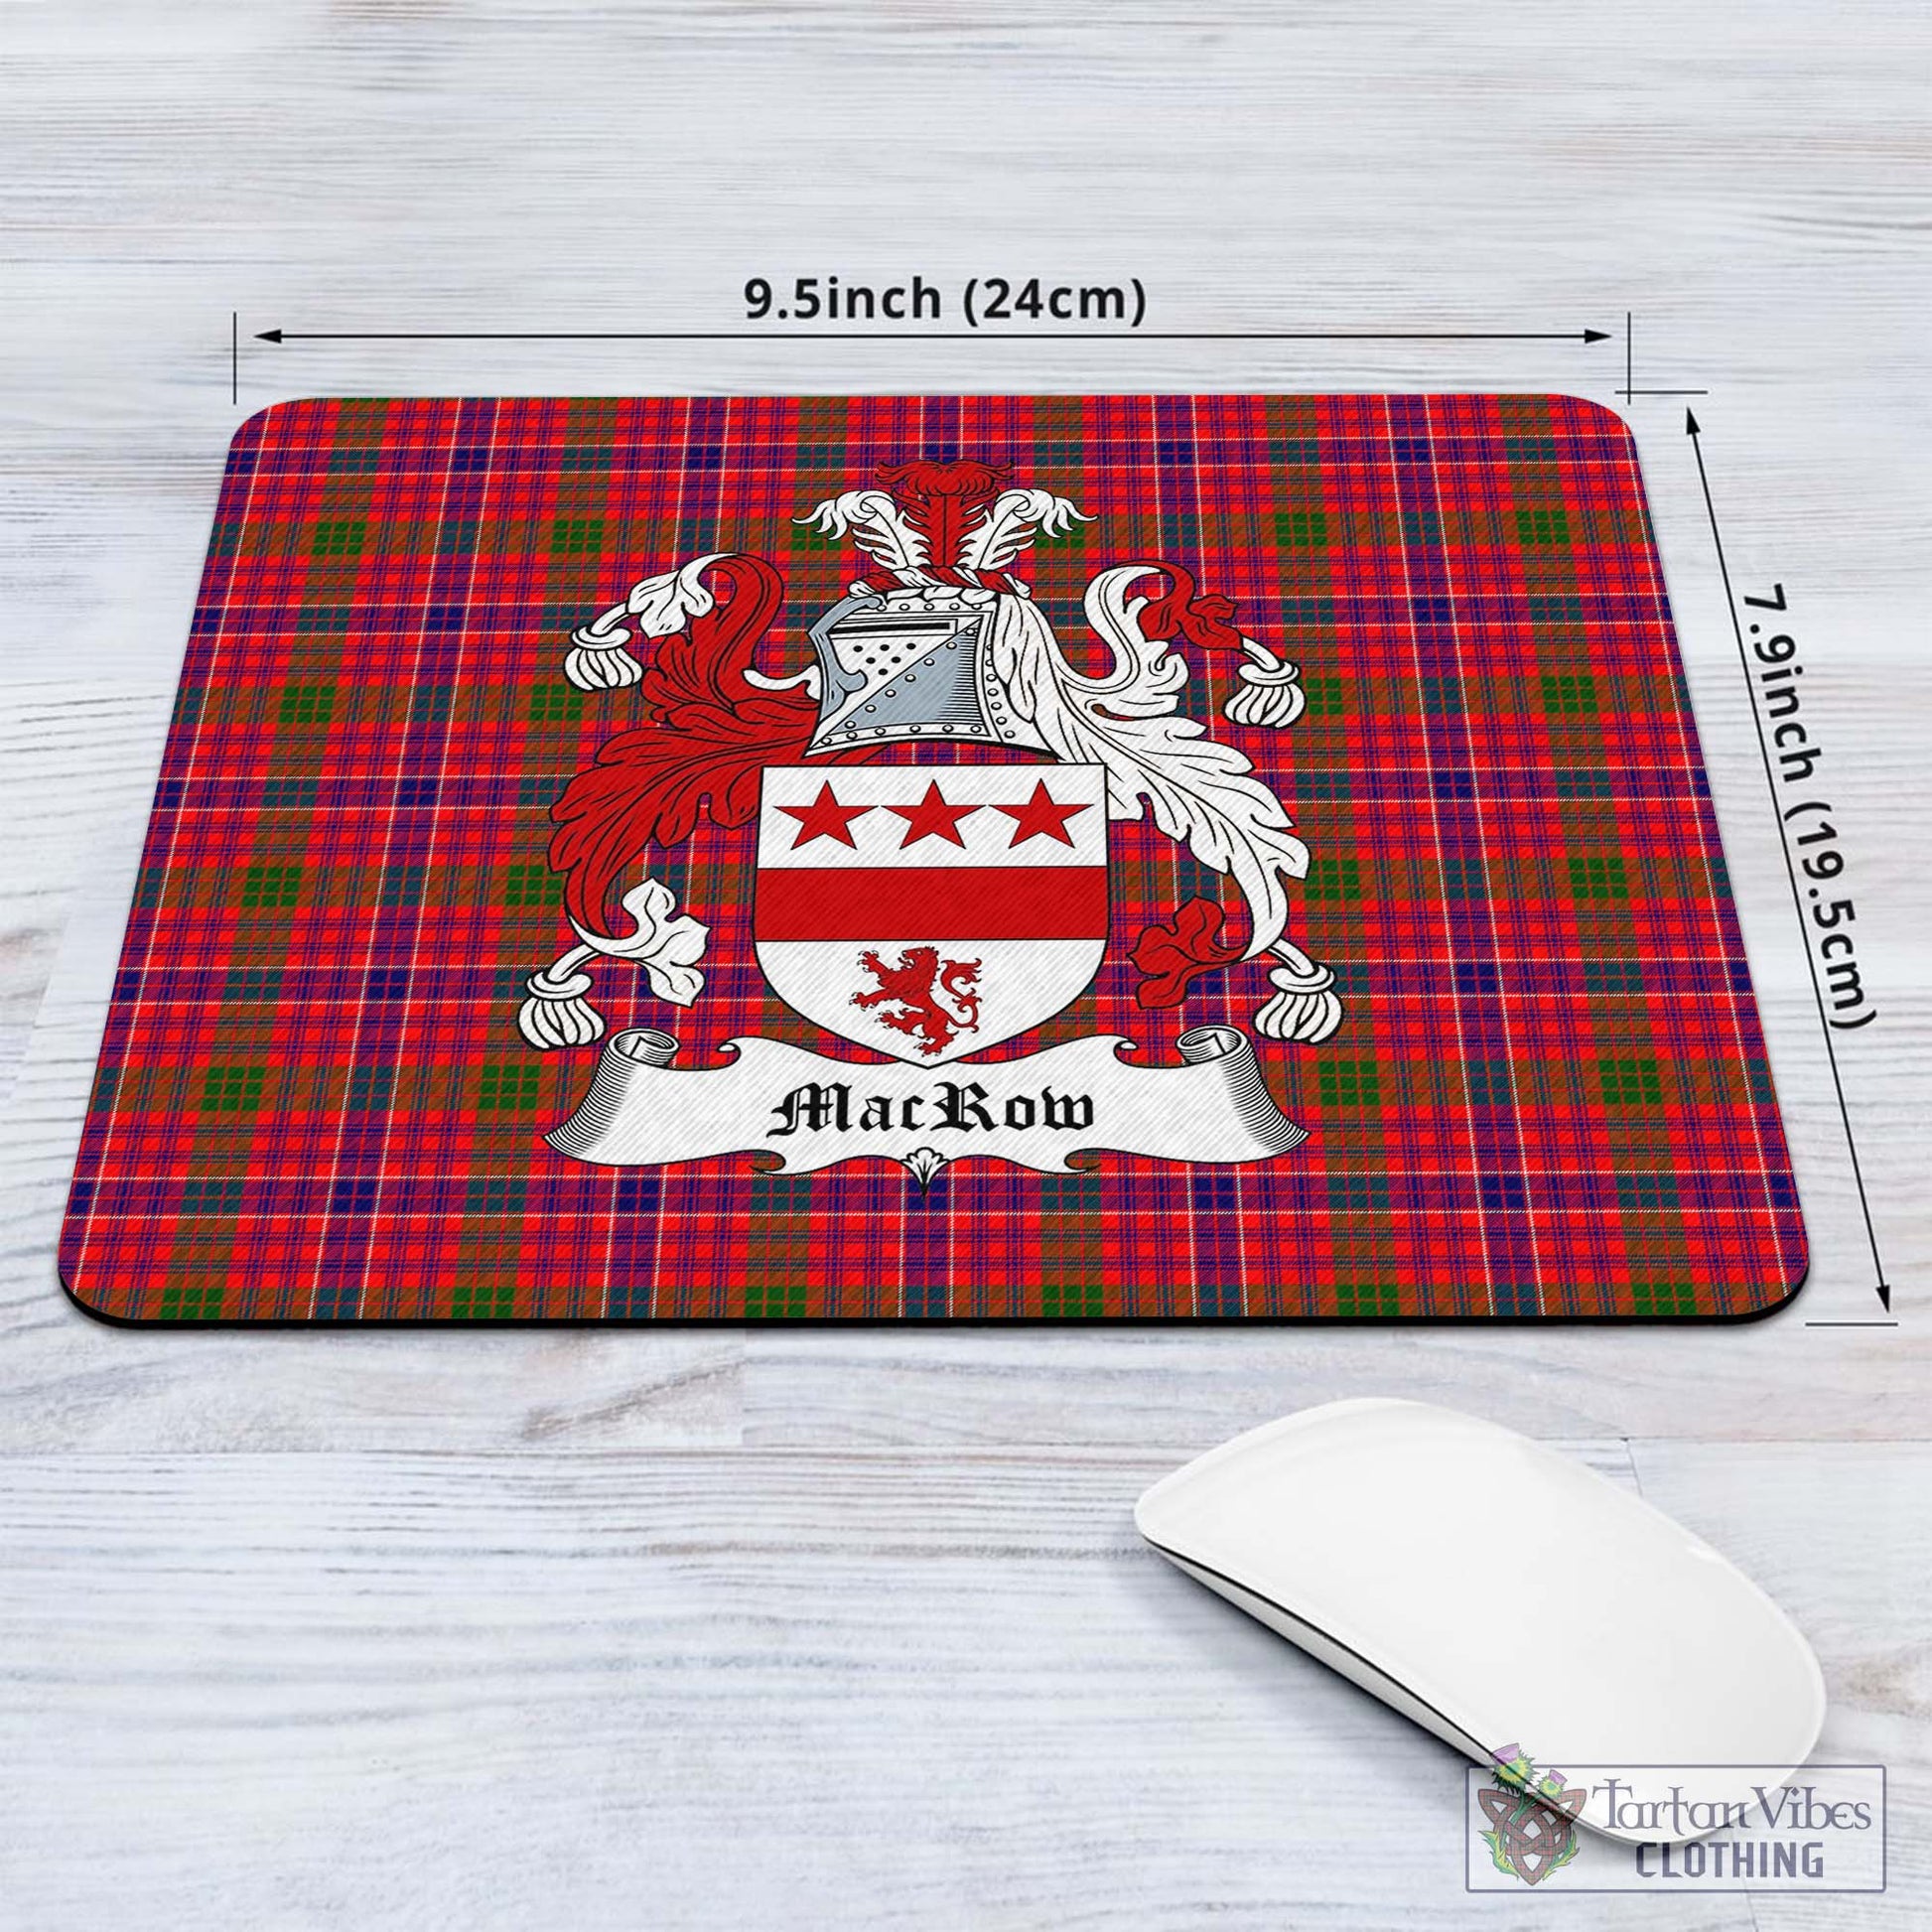 Tartan Vibes Clothing MacRow Tartan Mouse Pad with Family Crest